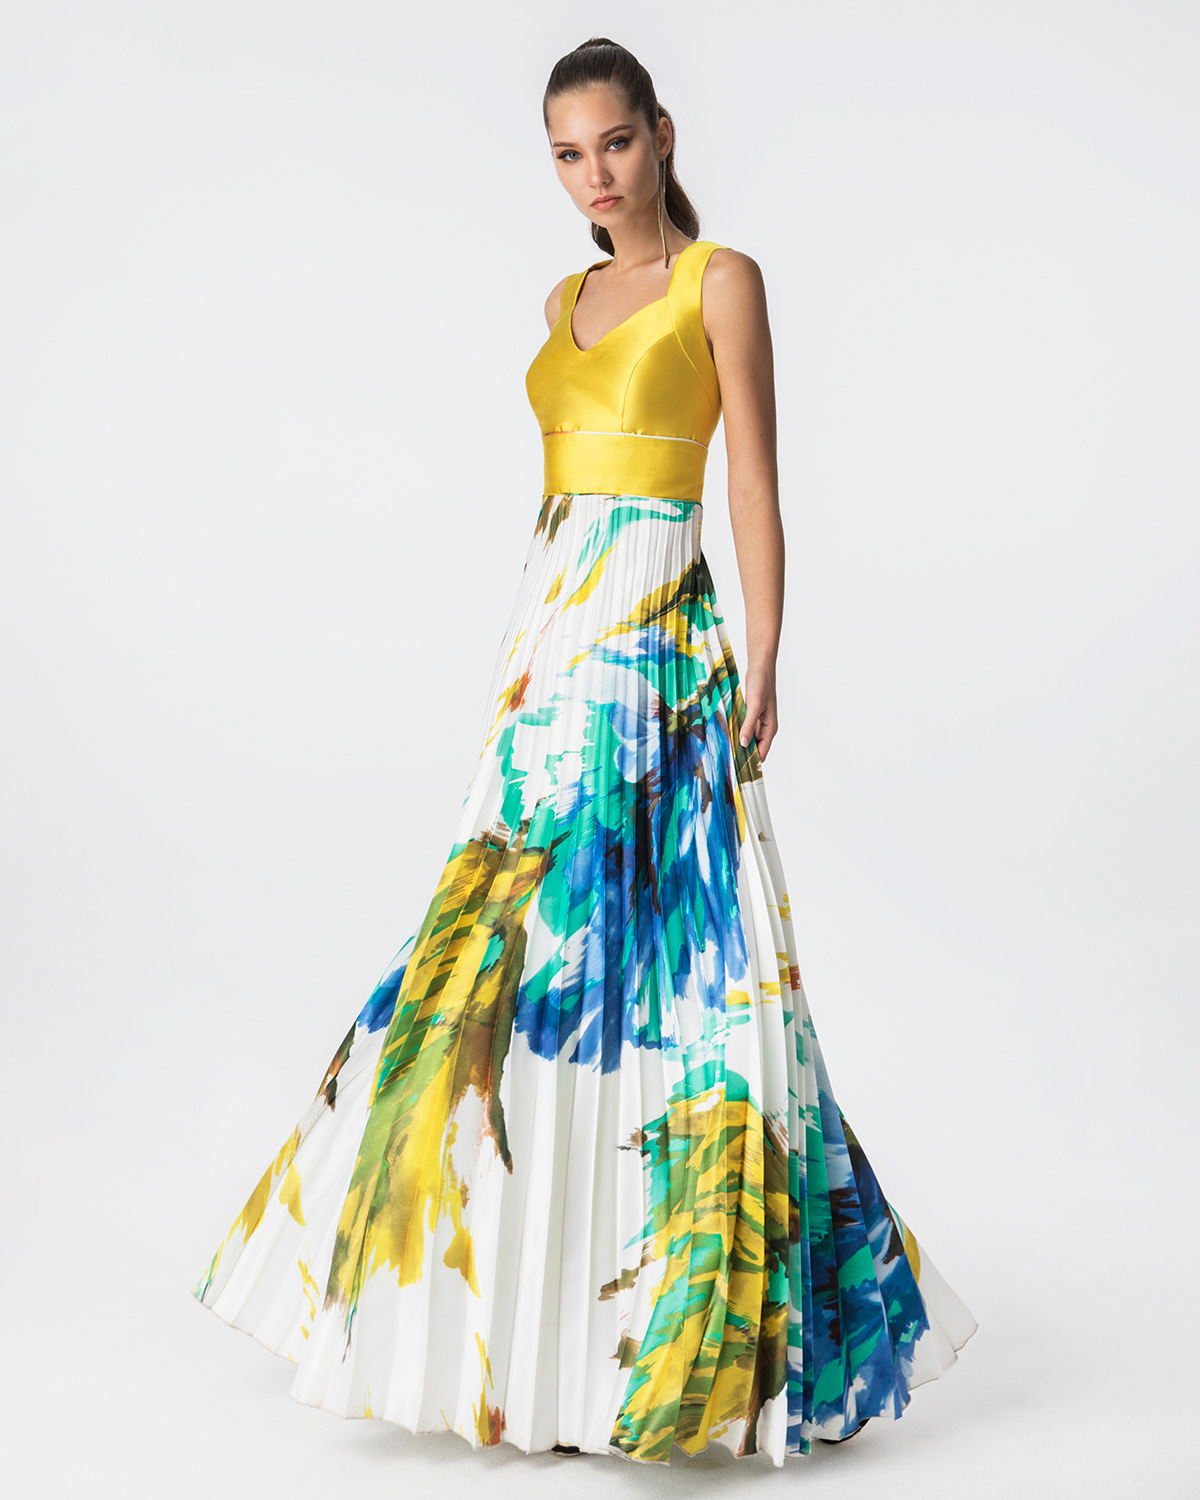 Cocktail Dresses / Long pleated satin dress with solid color top